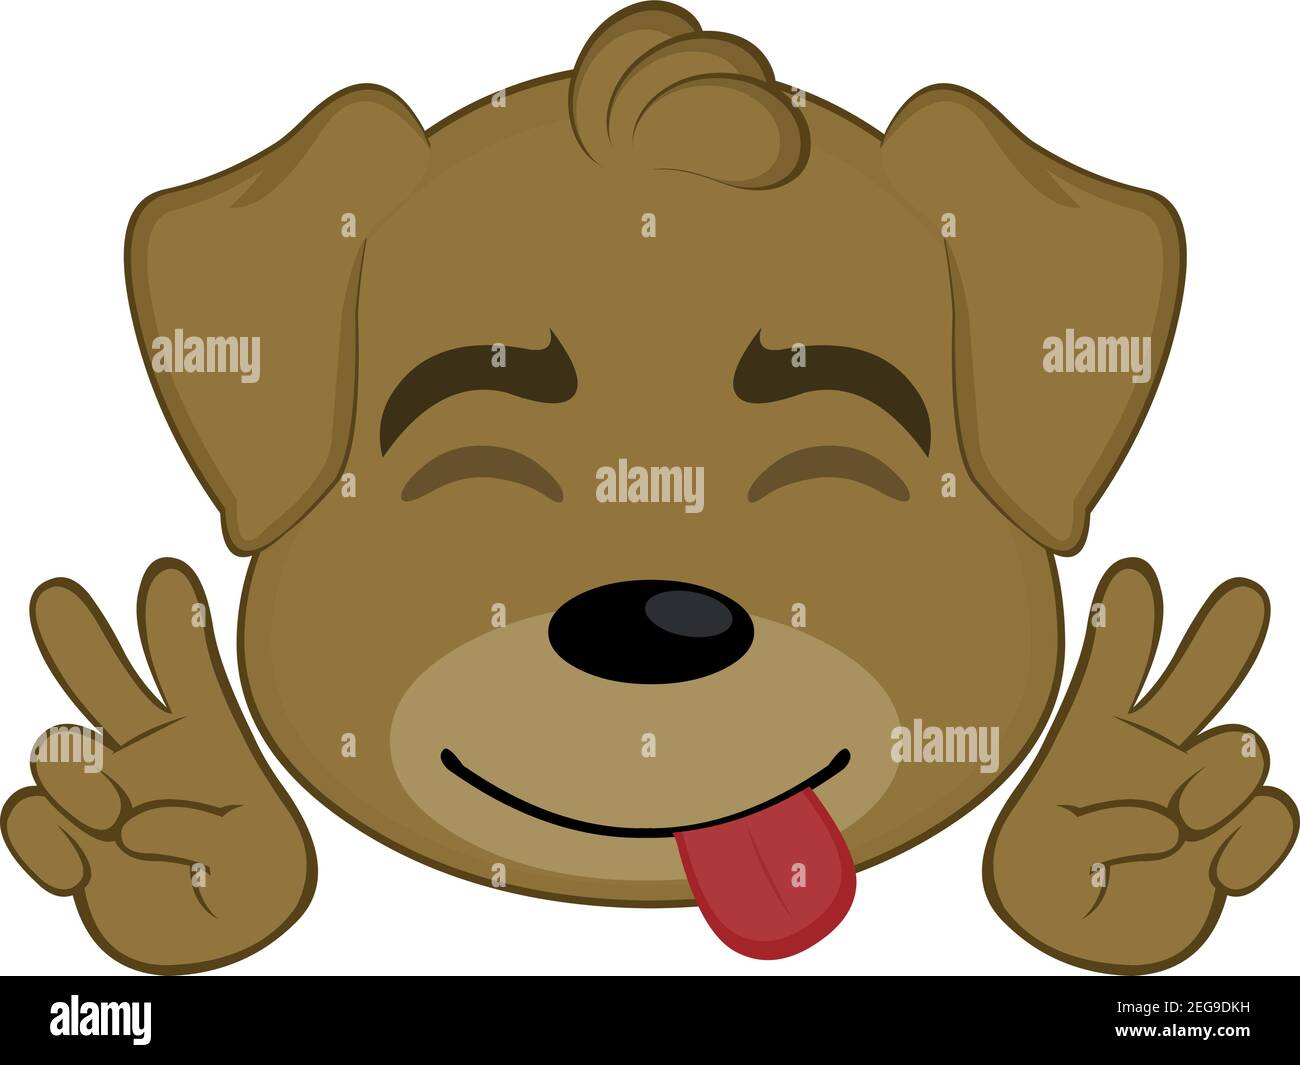 Vector emoticon  illustration cartoon of a dog's head with closed eyes, a happy expression, sticking out his tongue and a gesture of peace and love Stock Vector